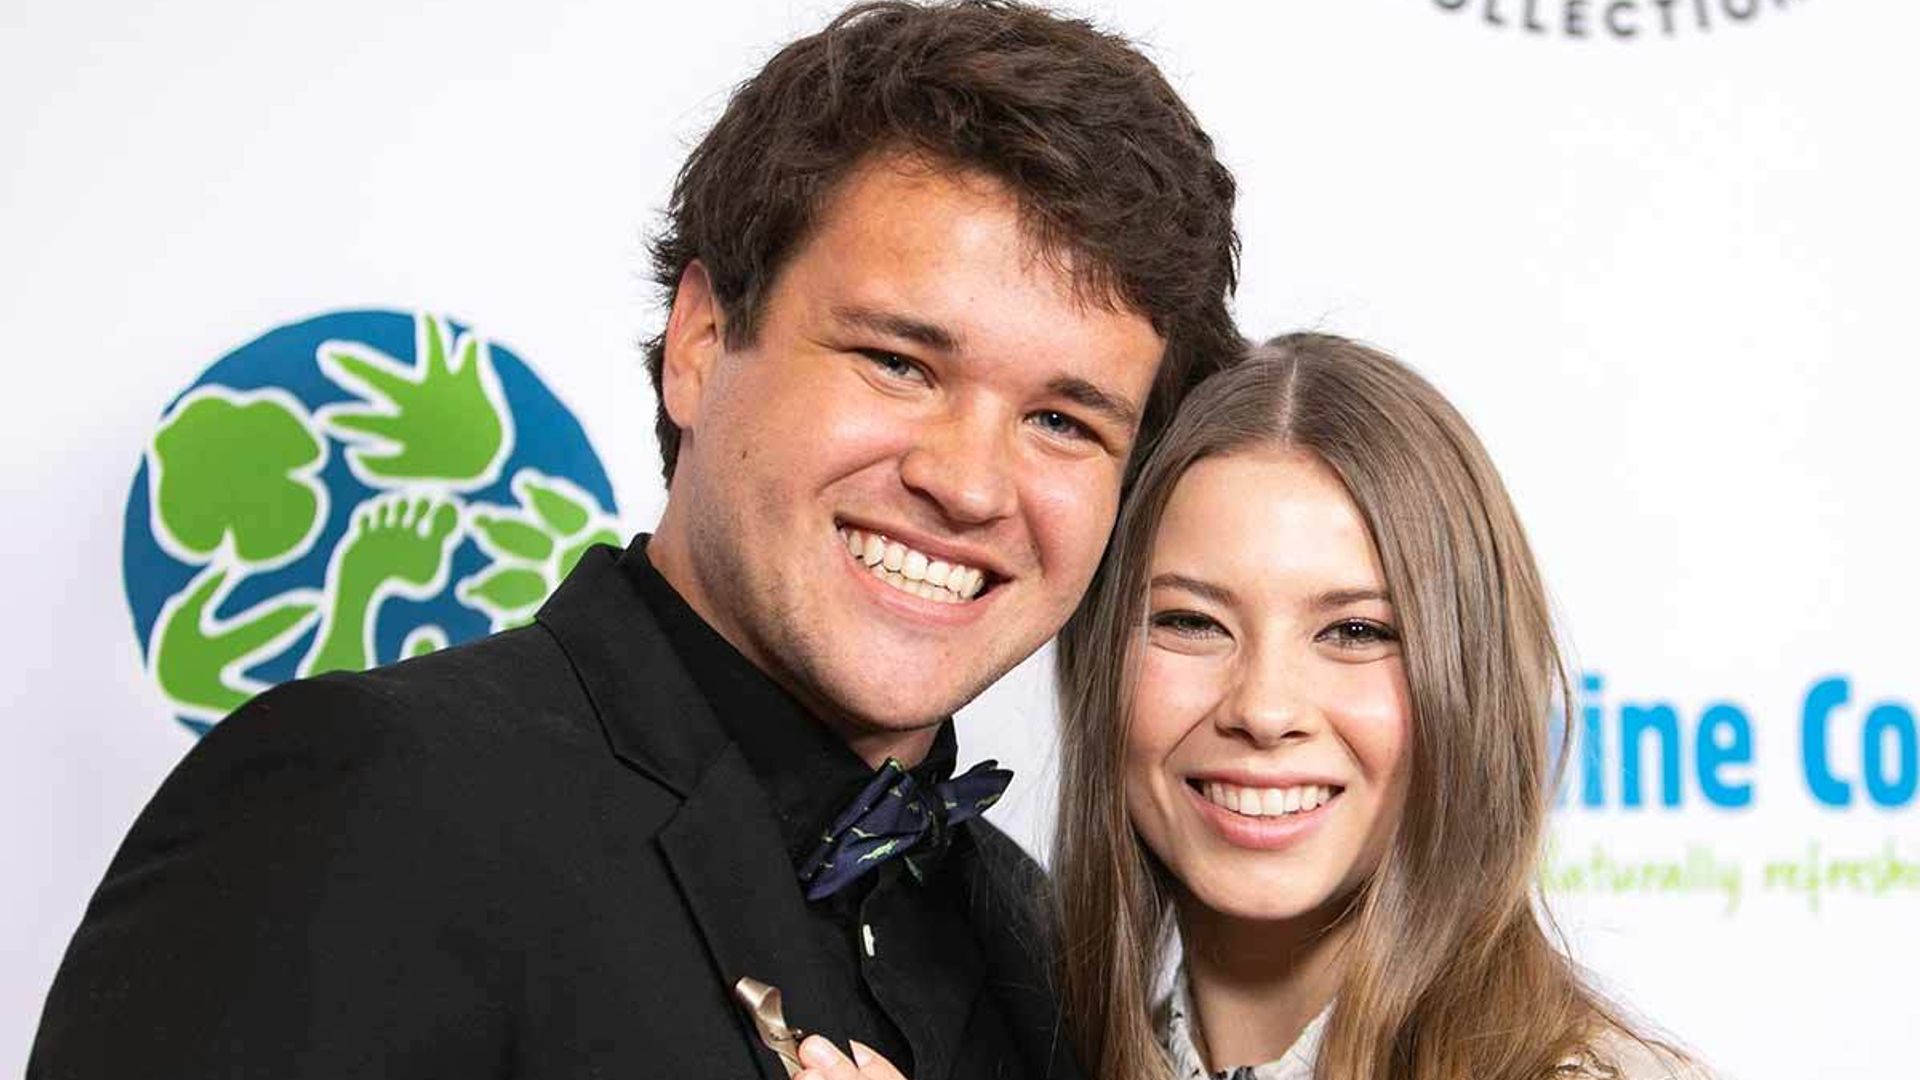 Bindi Irwin and Chandler Powell share the most adorable photos of baby Grace lounging in a lawn chair